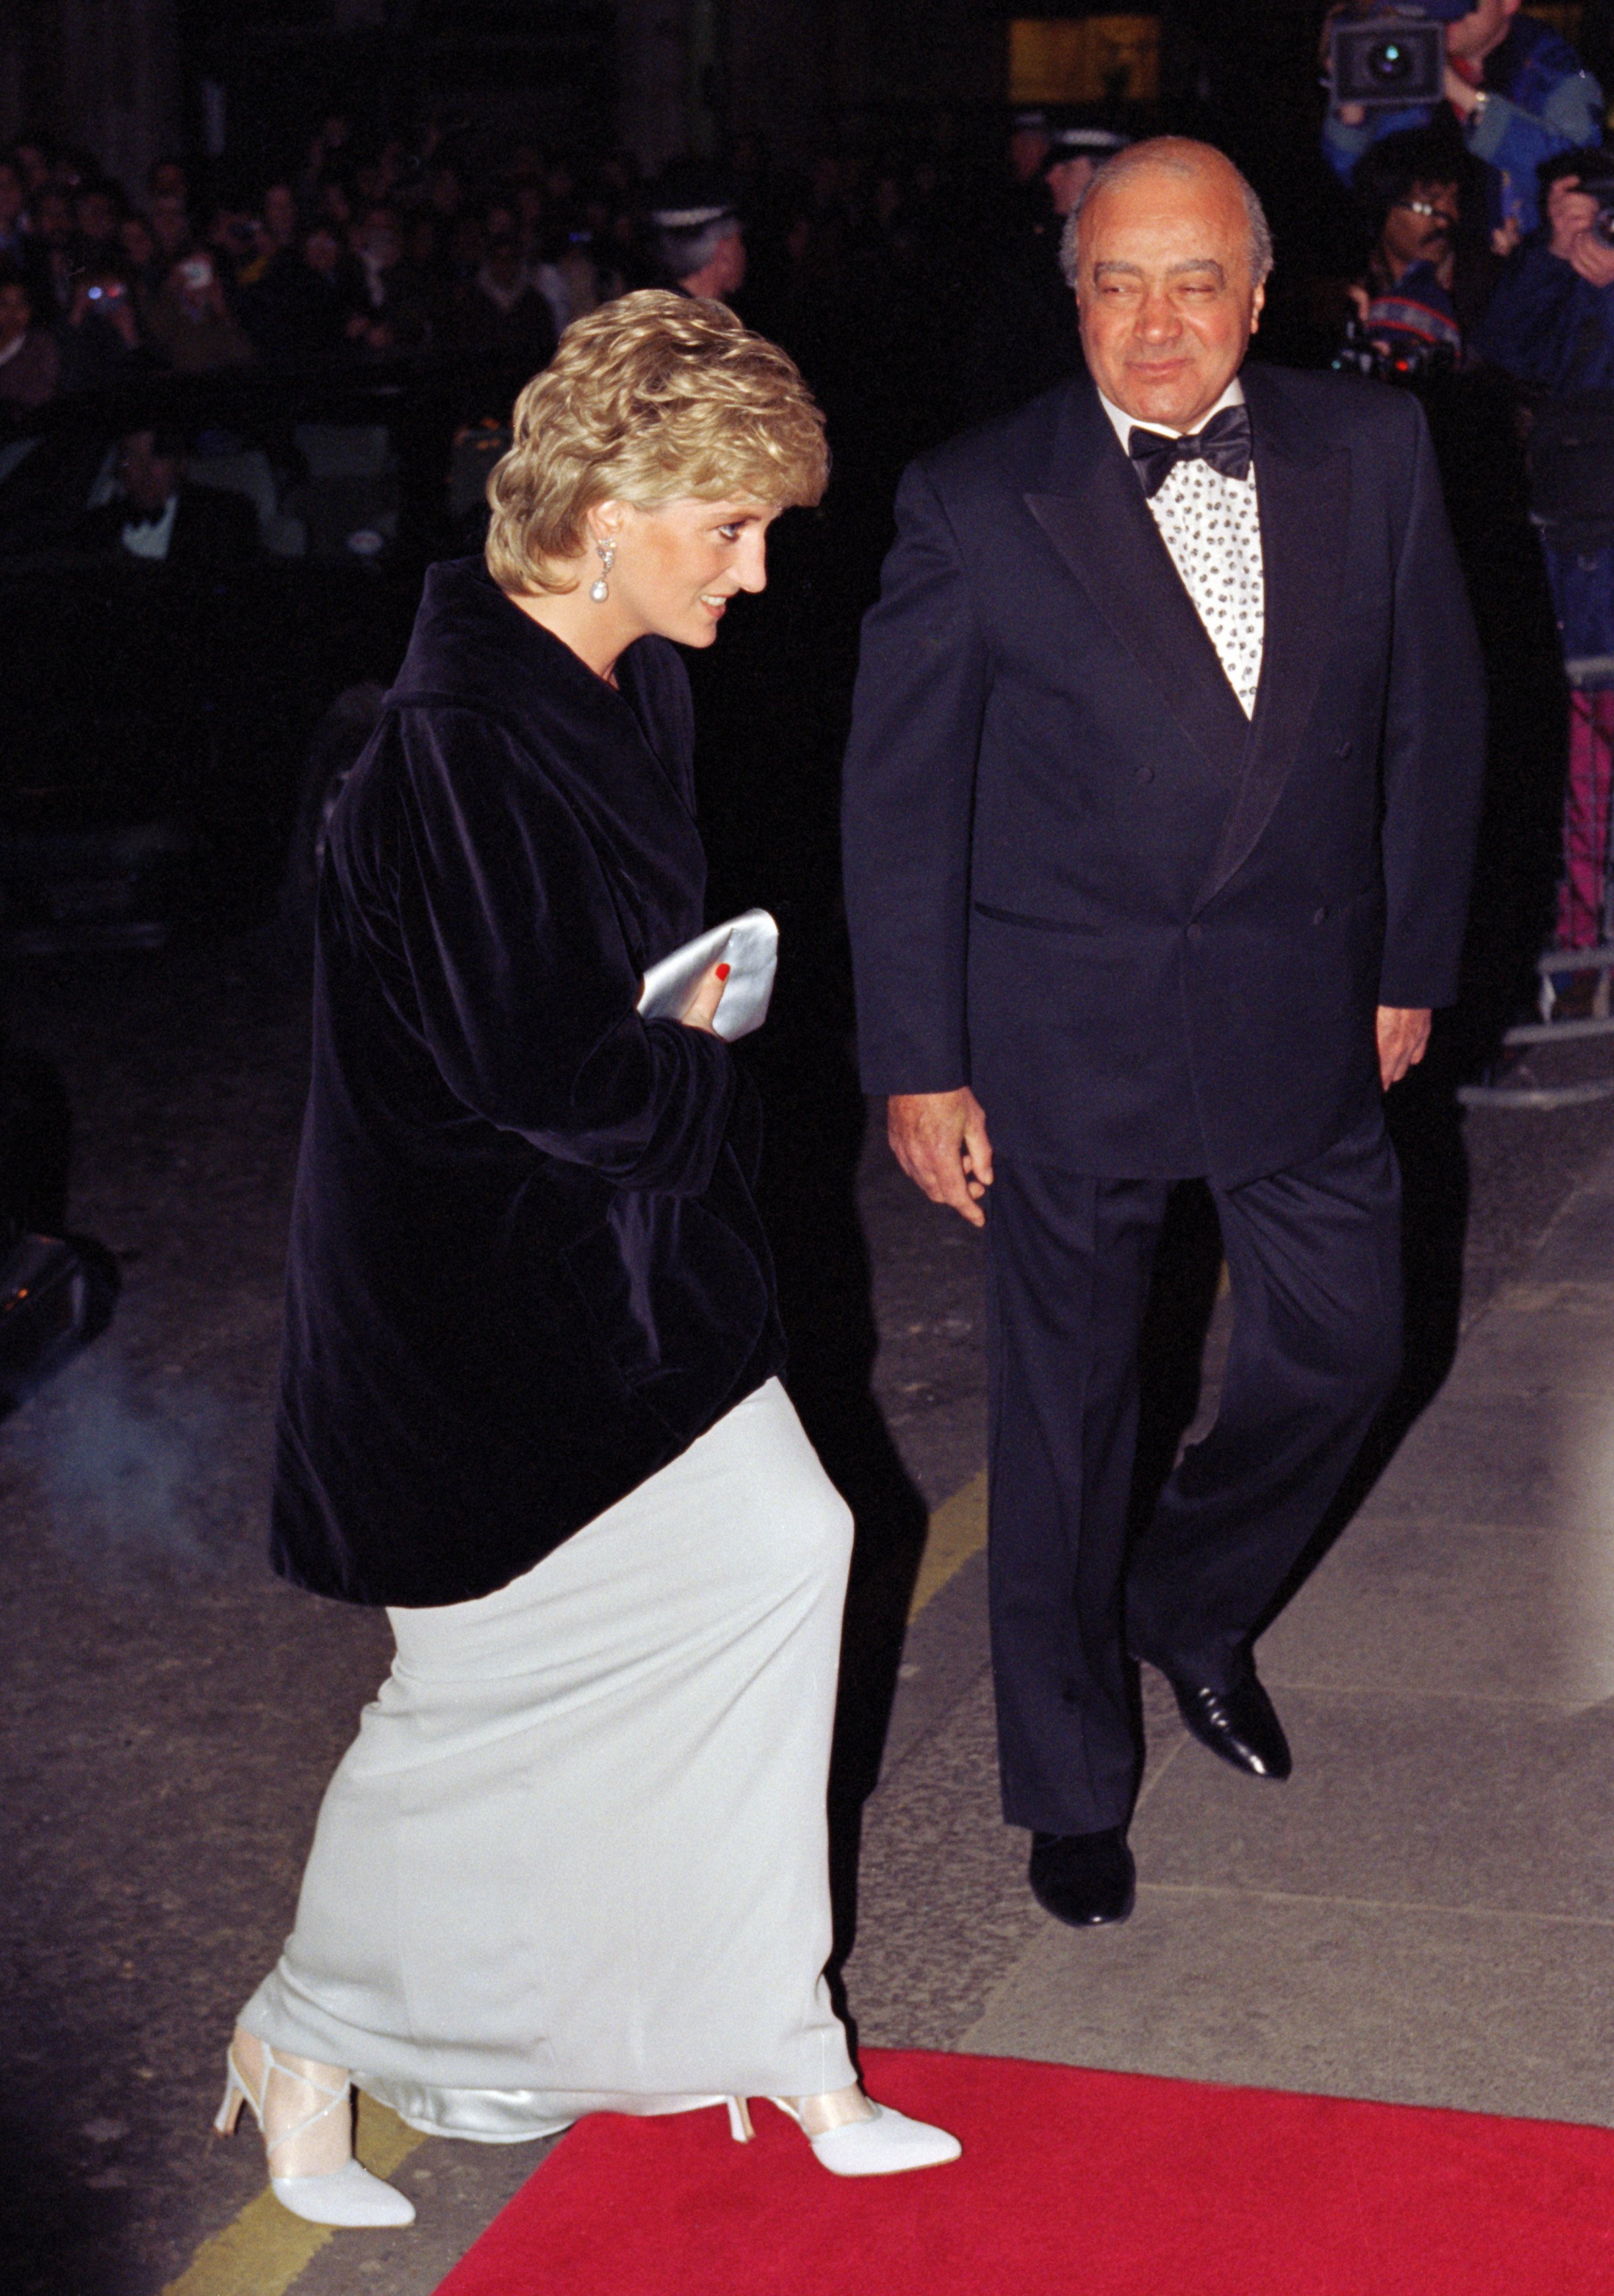 Princess Diana with Mohamed Al-Fayed attending a gala dinner in London 1995. | Source: Getty Images